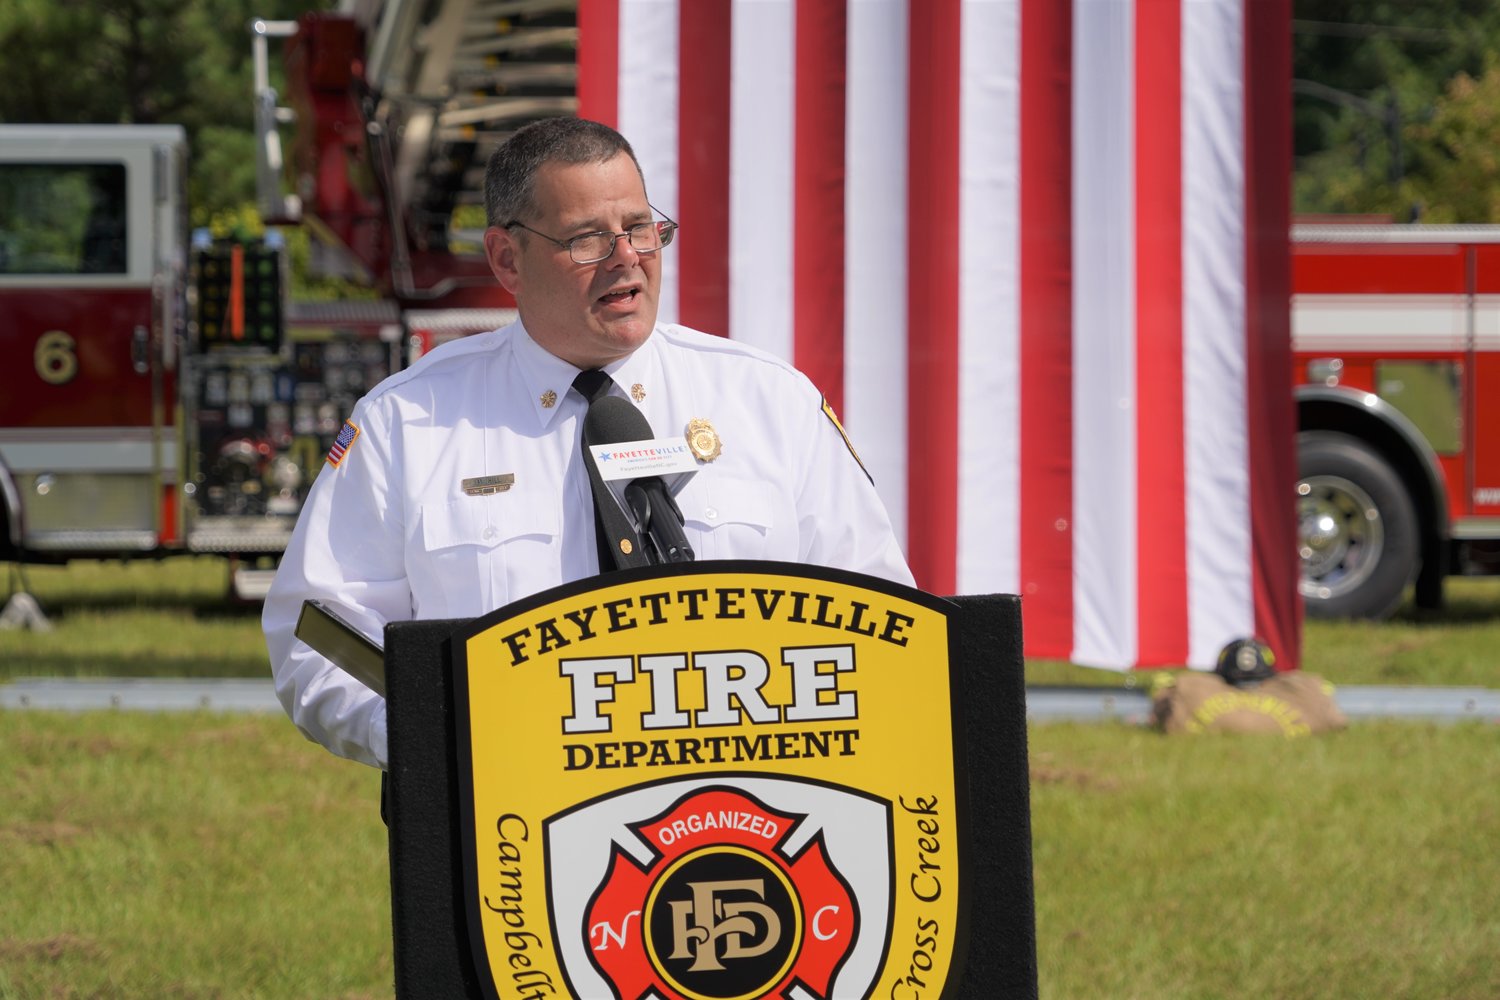 Fayetteville Fire Chief Mike Hill speaks during the groundbreaking for a new Fire Station No. 4 on Bragg Boulevard on Tuesday.